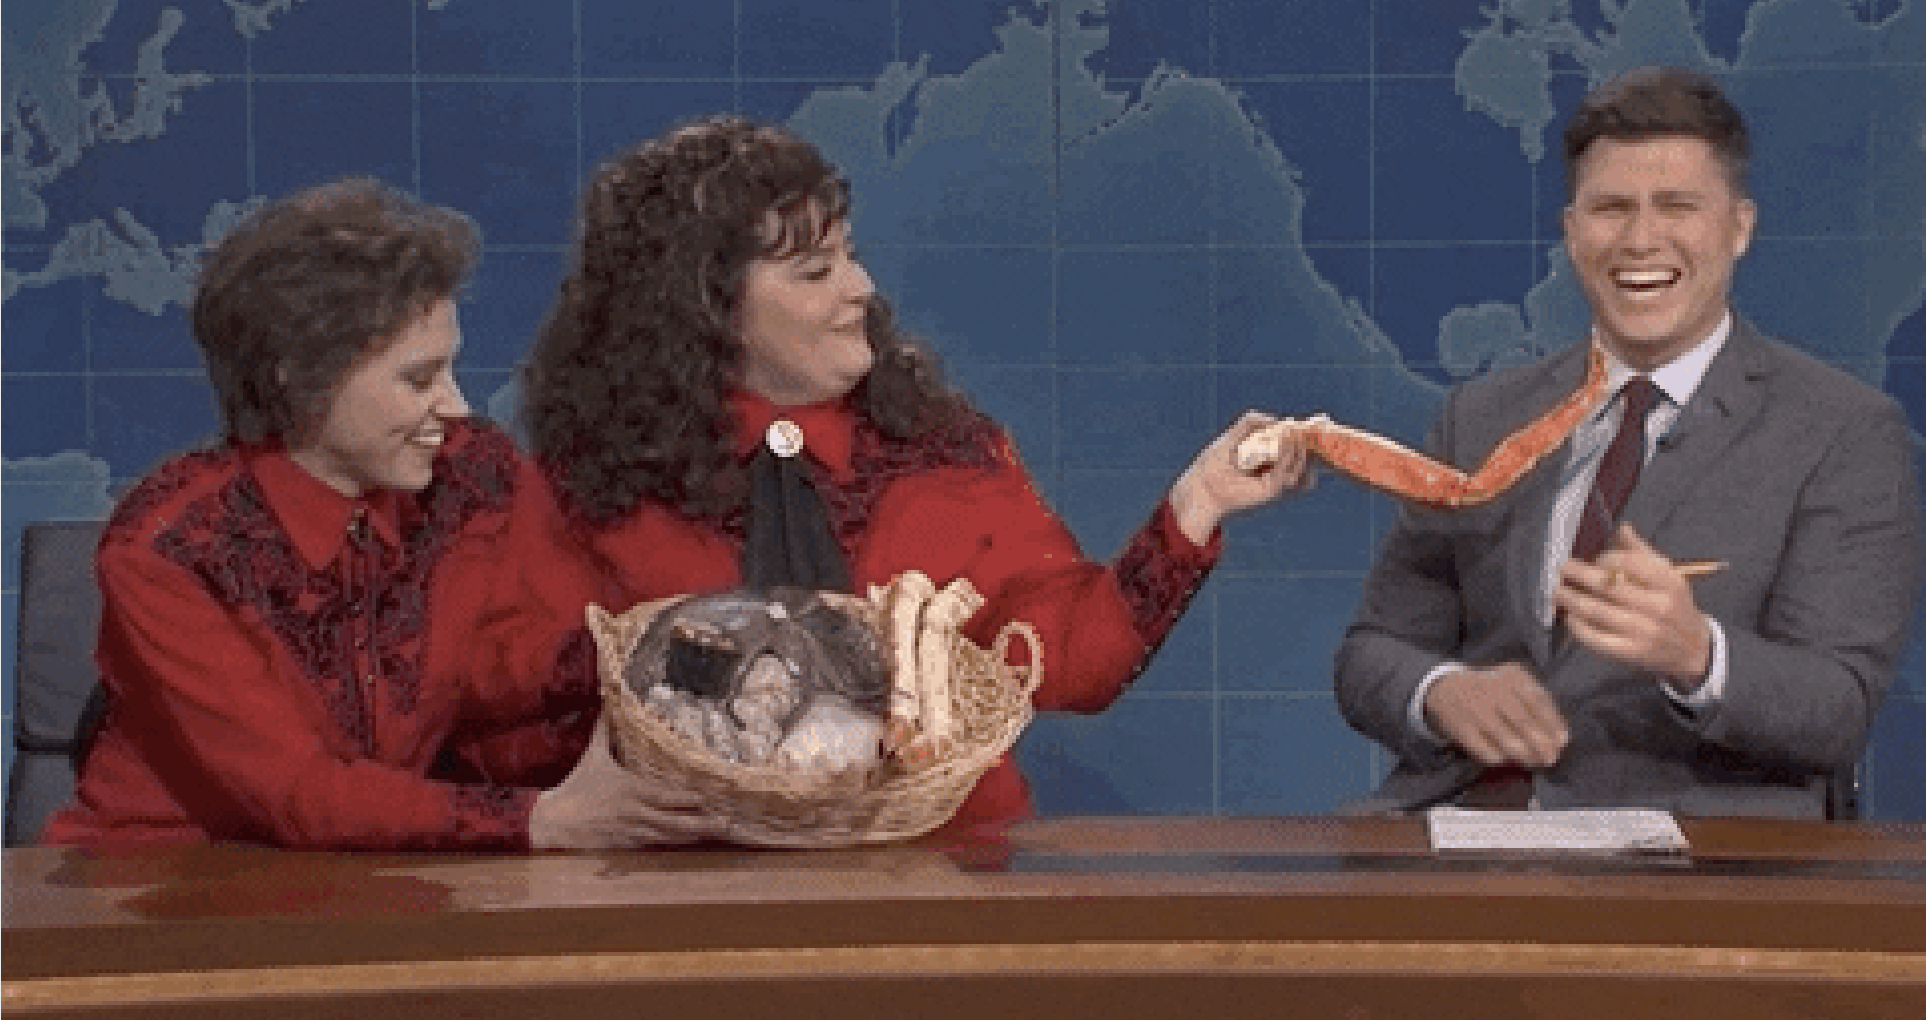 Cast members of SNL during the &quot;Weekend Update&quot; segment, with one holding up a crab leg